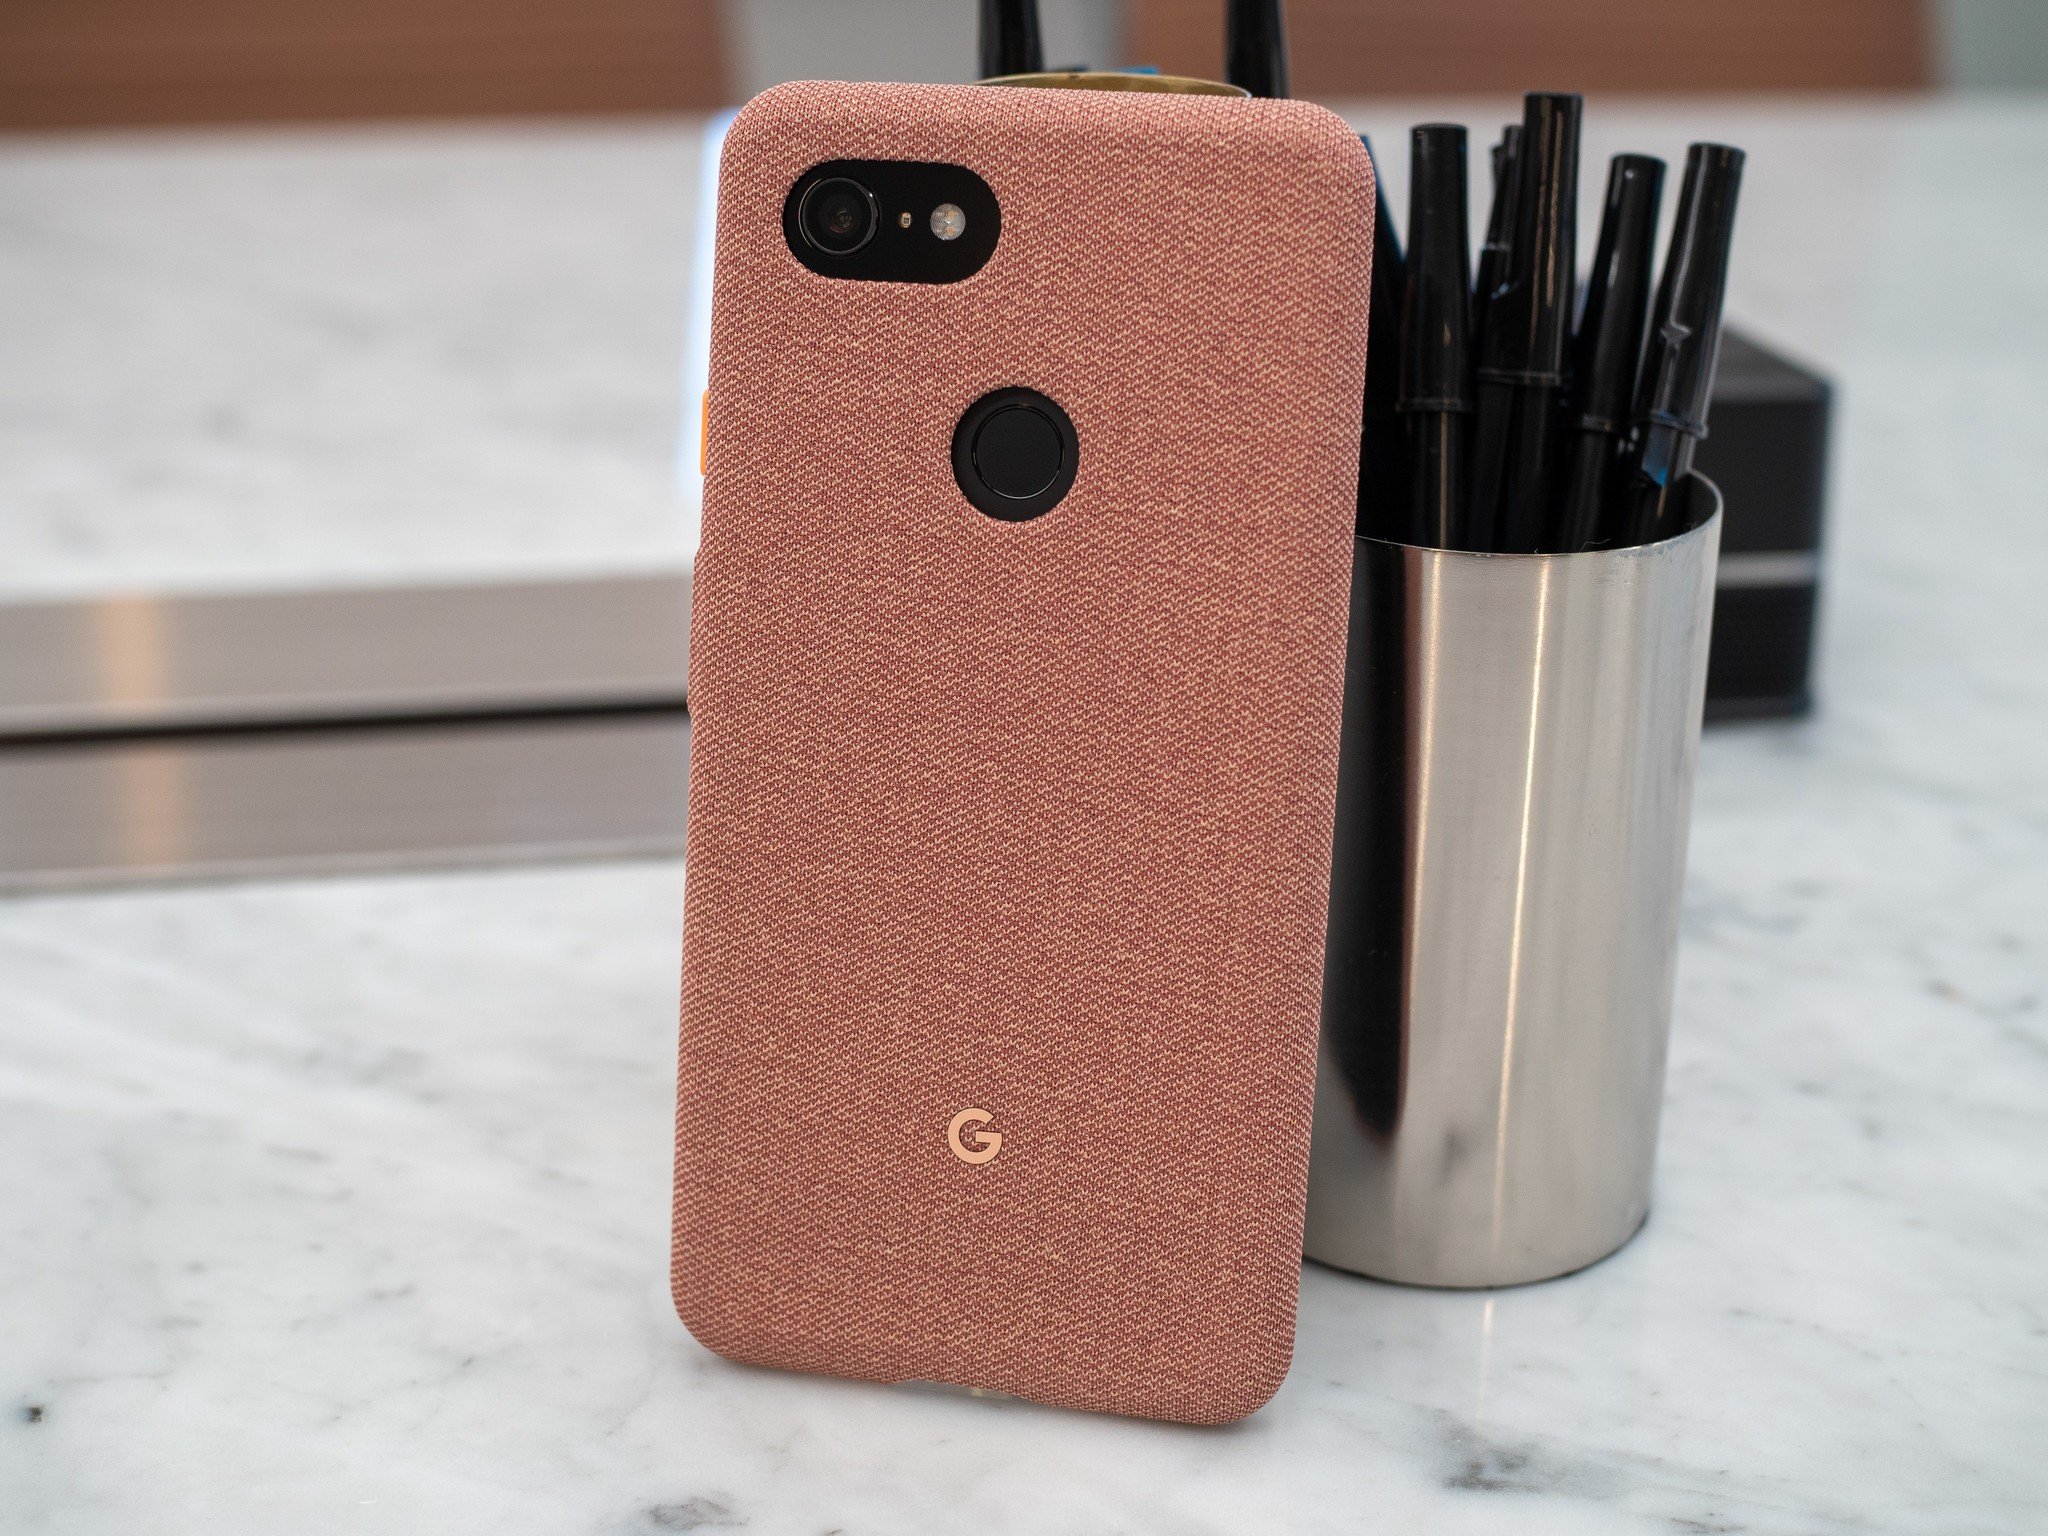 Best Google Pixel 3 XL cases 2021 | Android Central